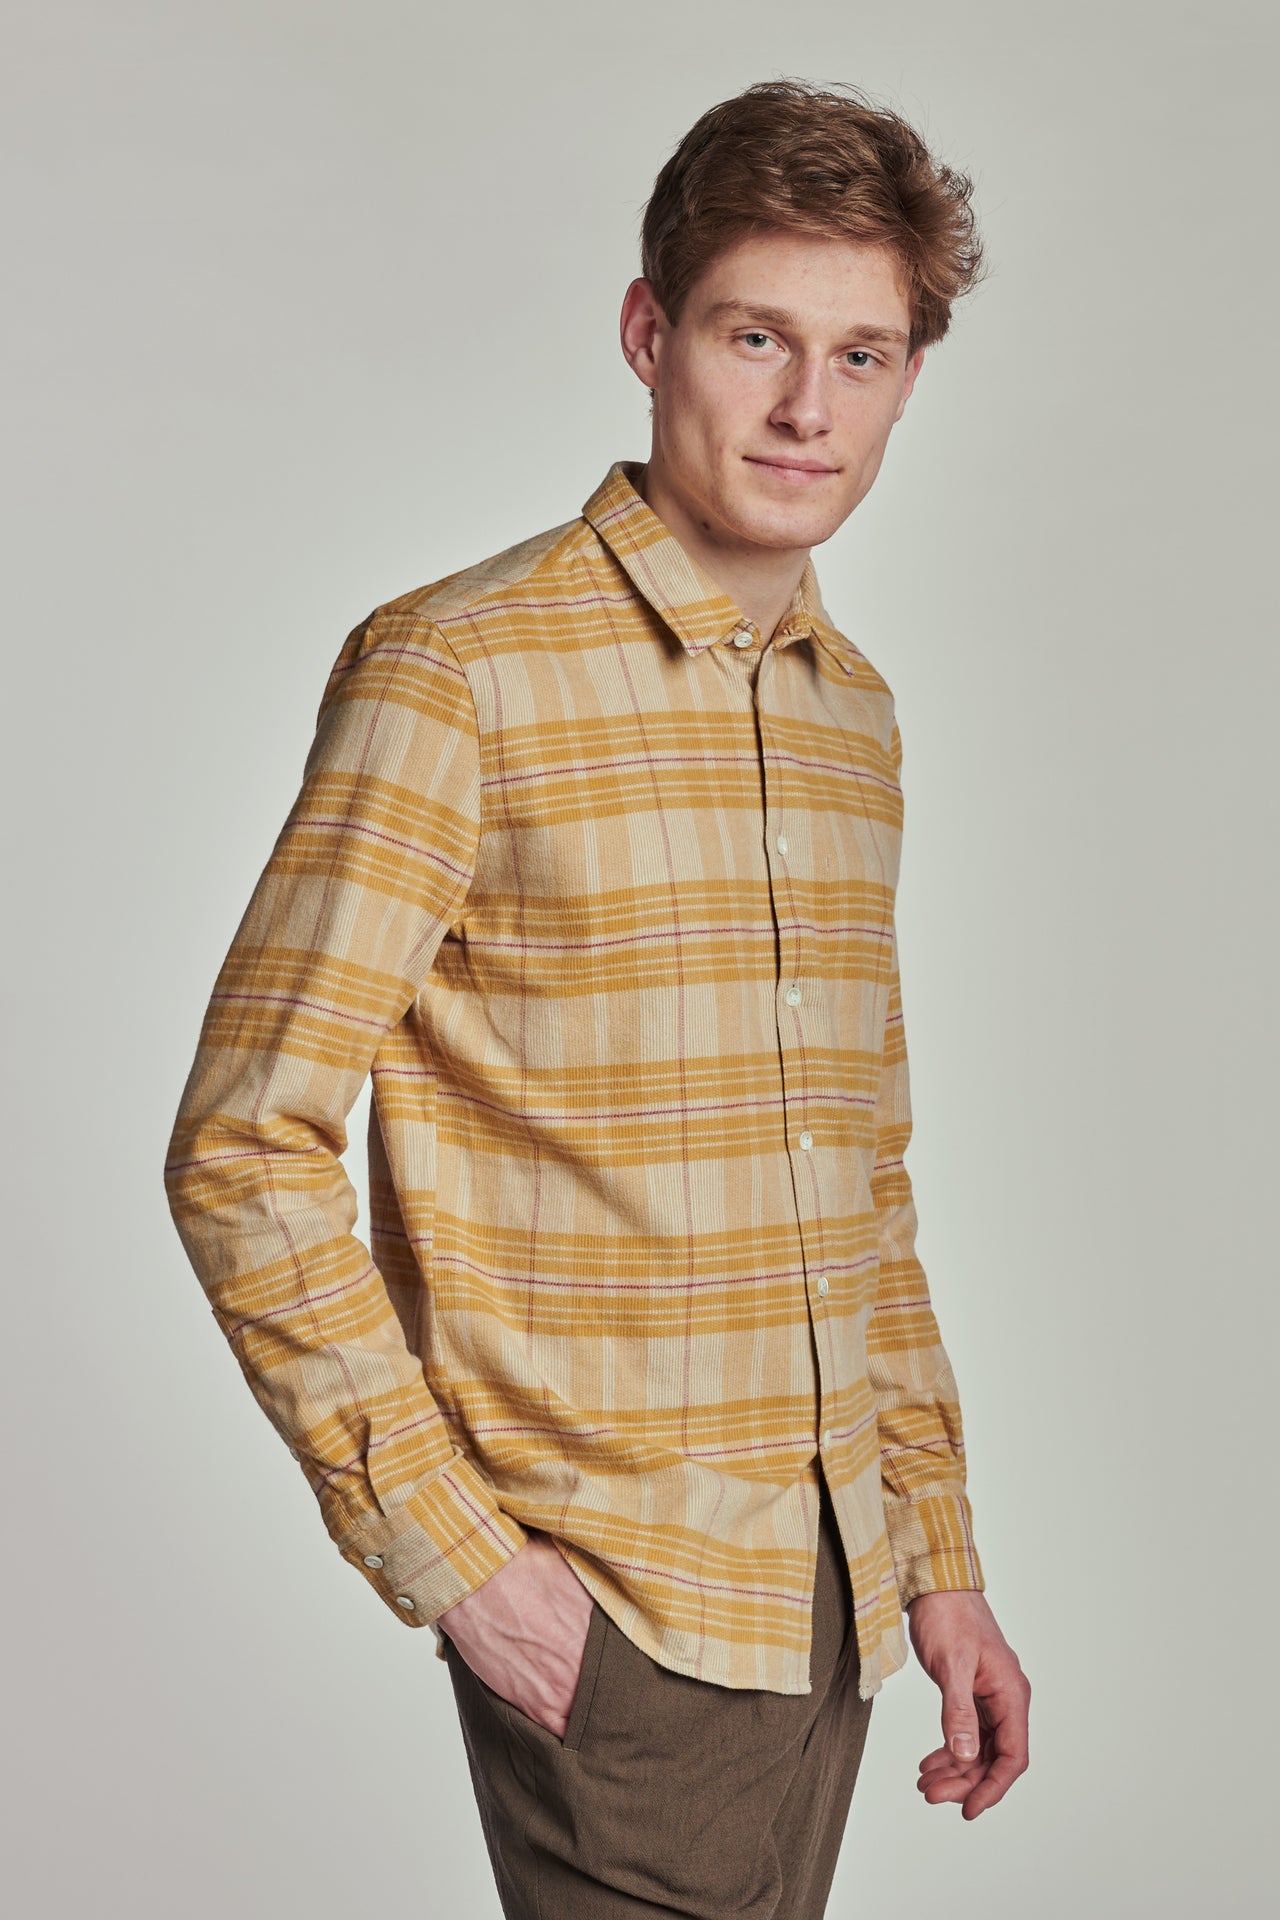 Feel Good Shirt in a Yellow Subtle Chequered Japanese Soft Corduroy Cotton